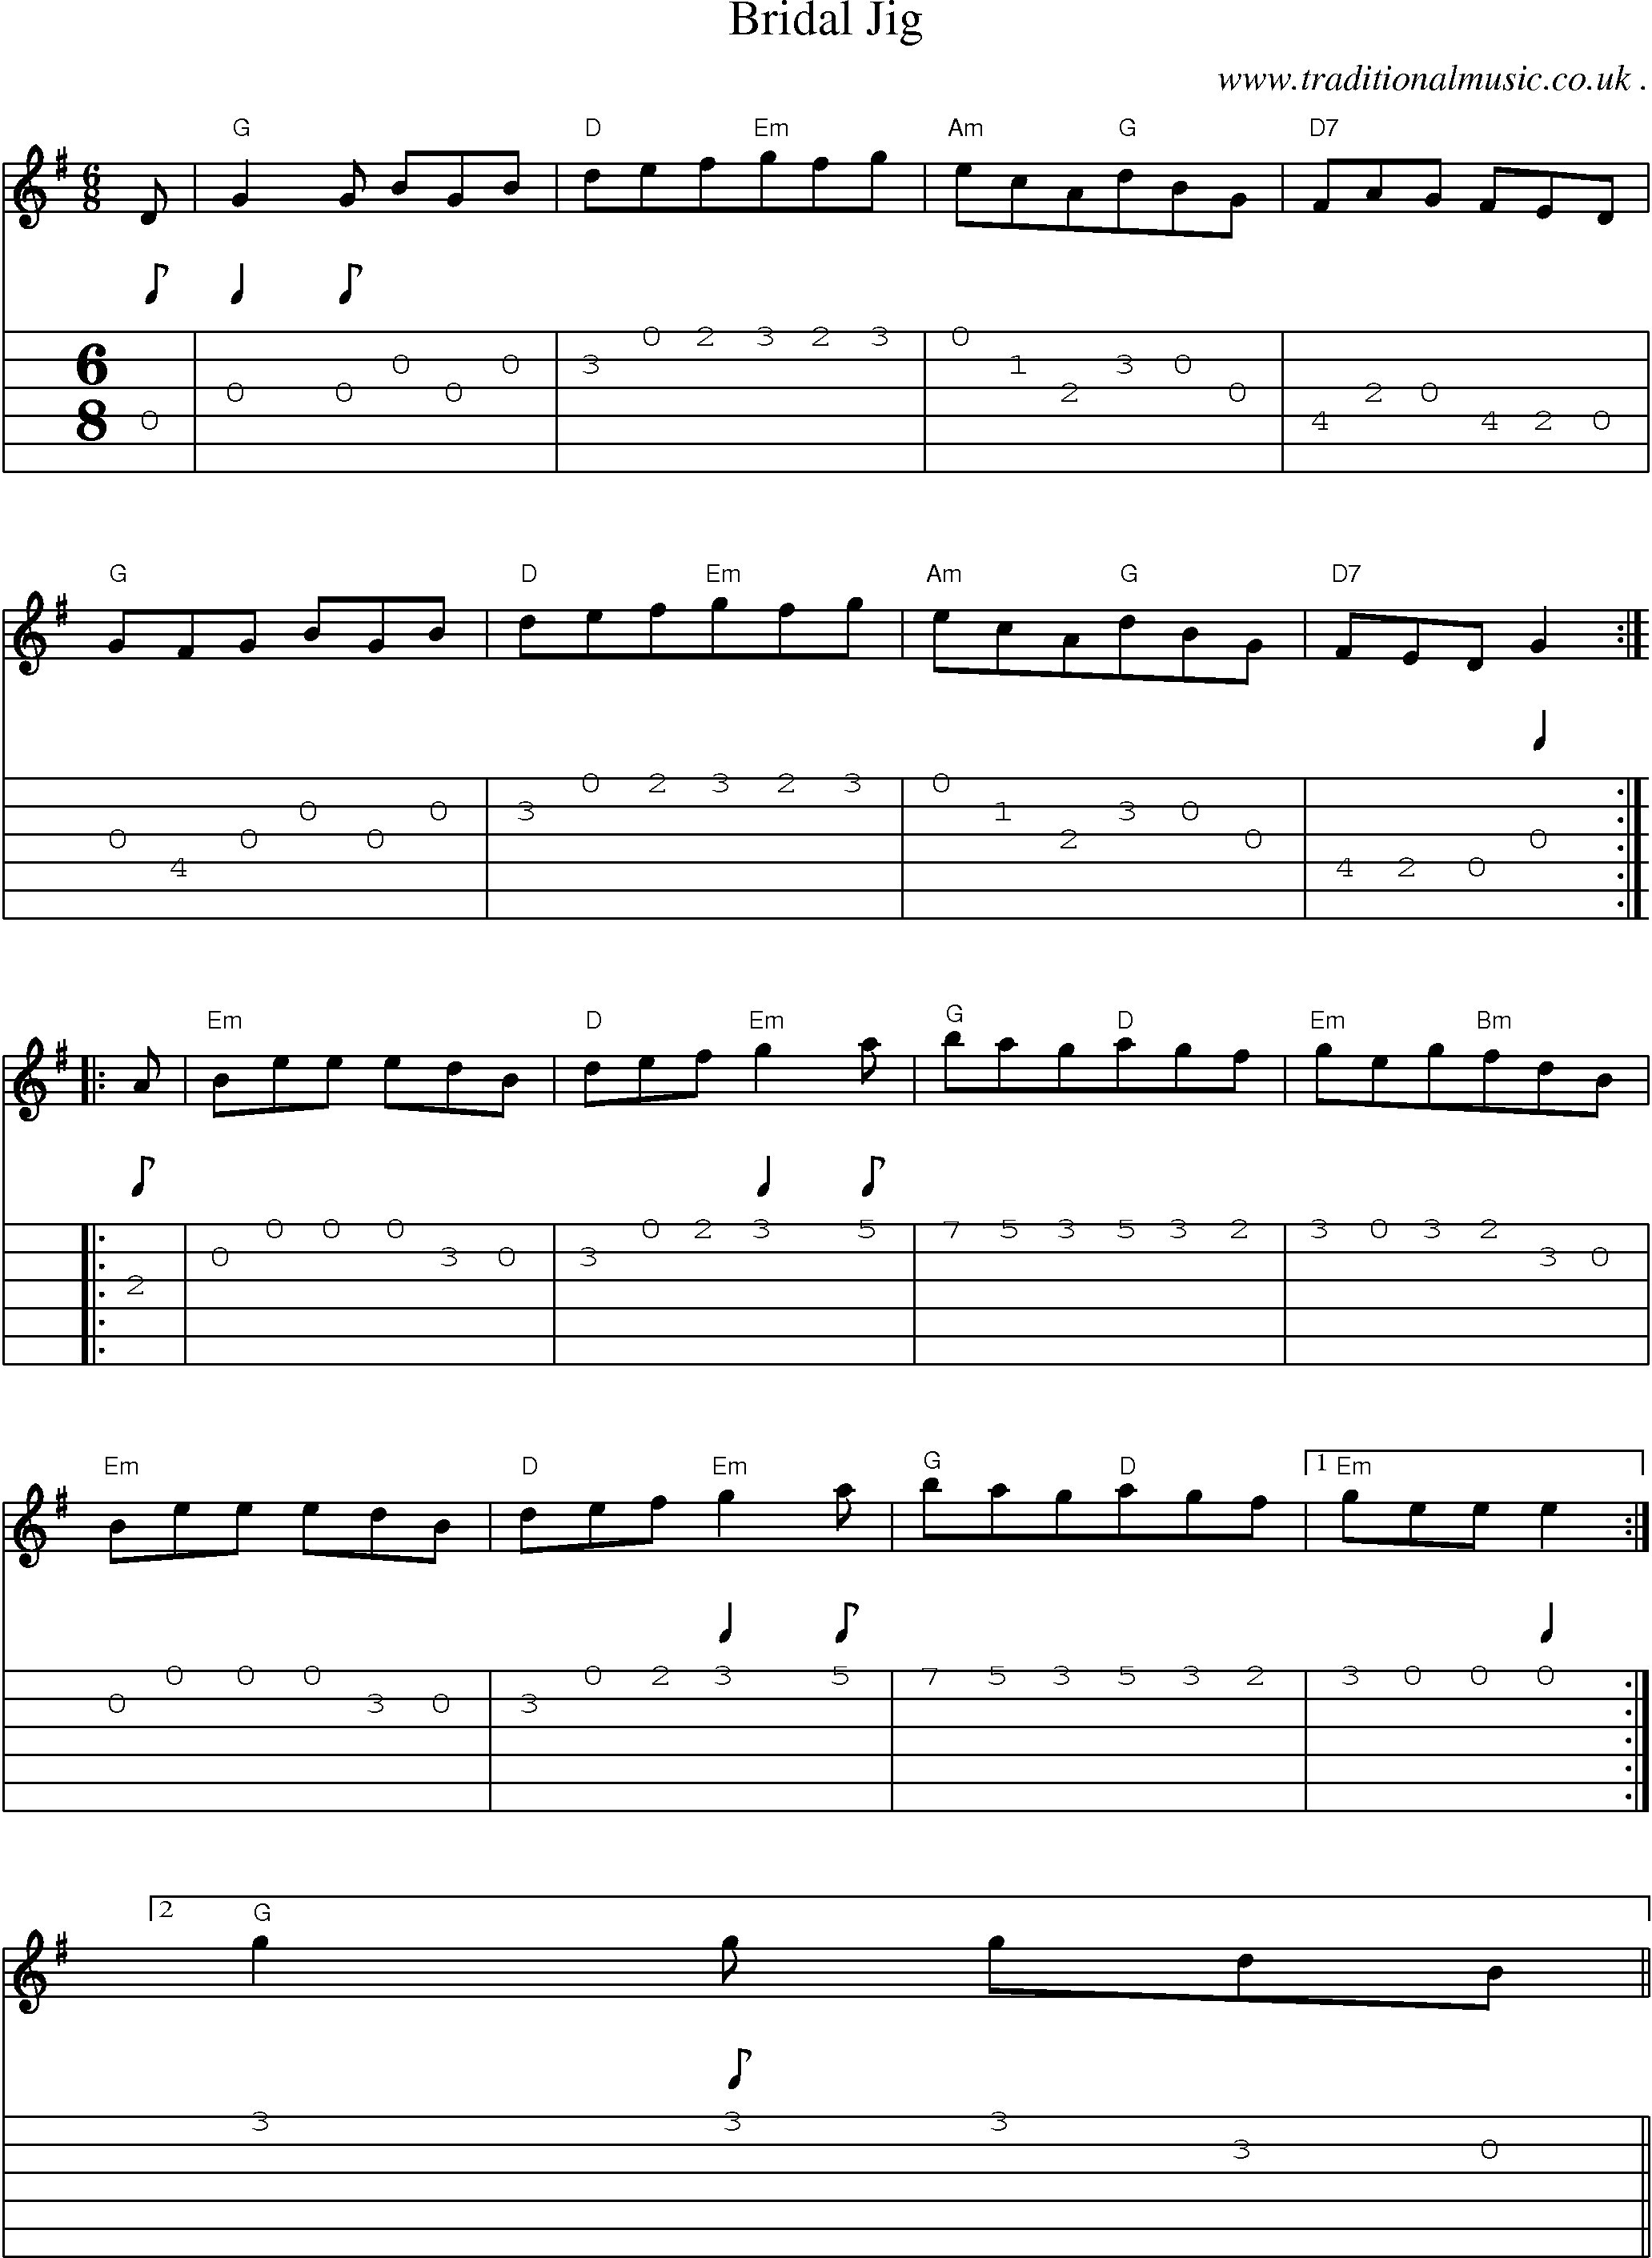 Sheet-Music and Guitar Tabs for Bridal Jig